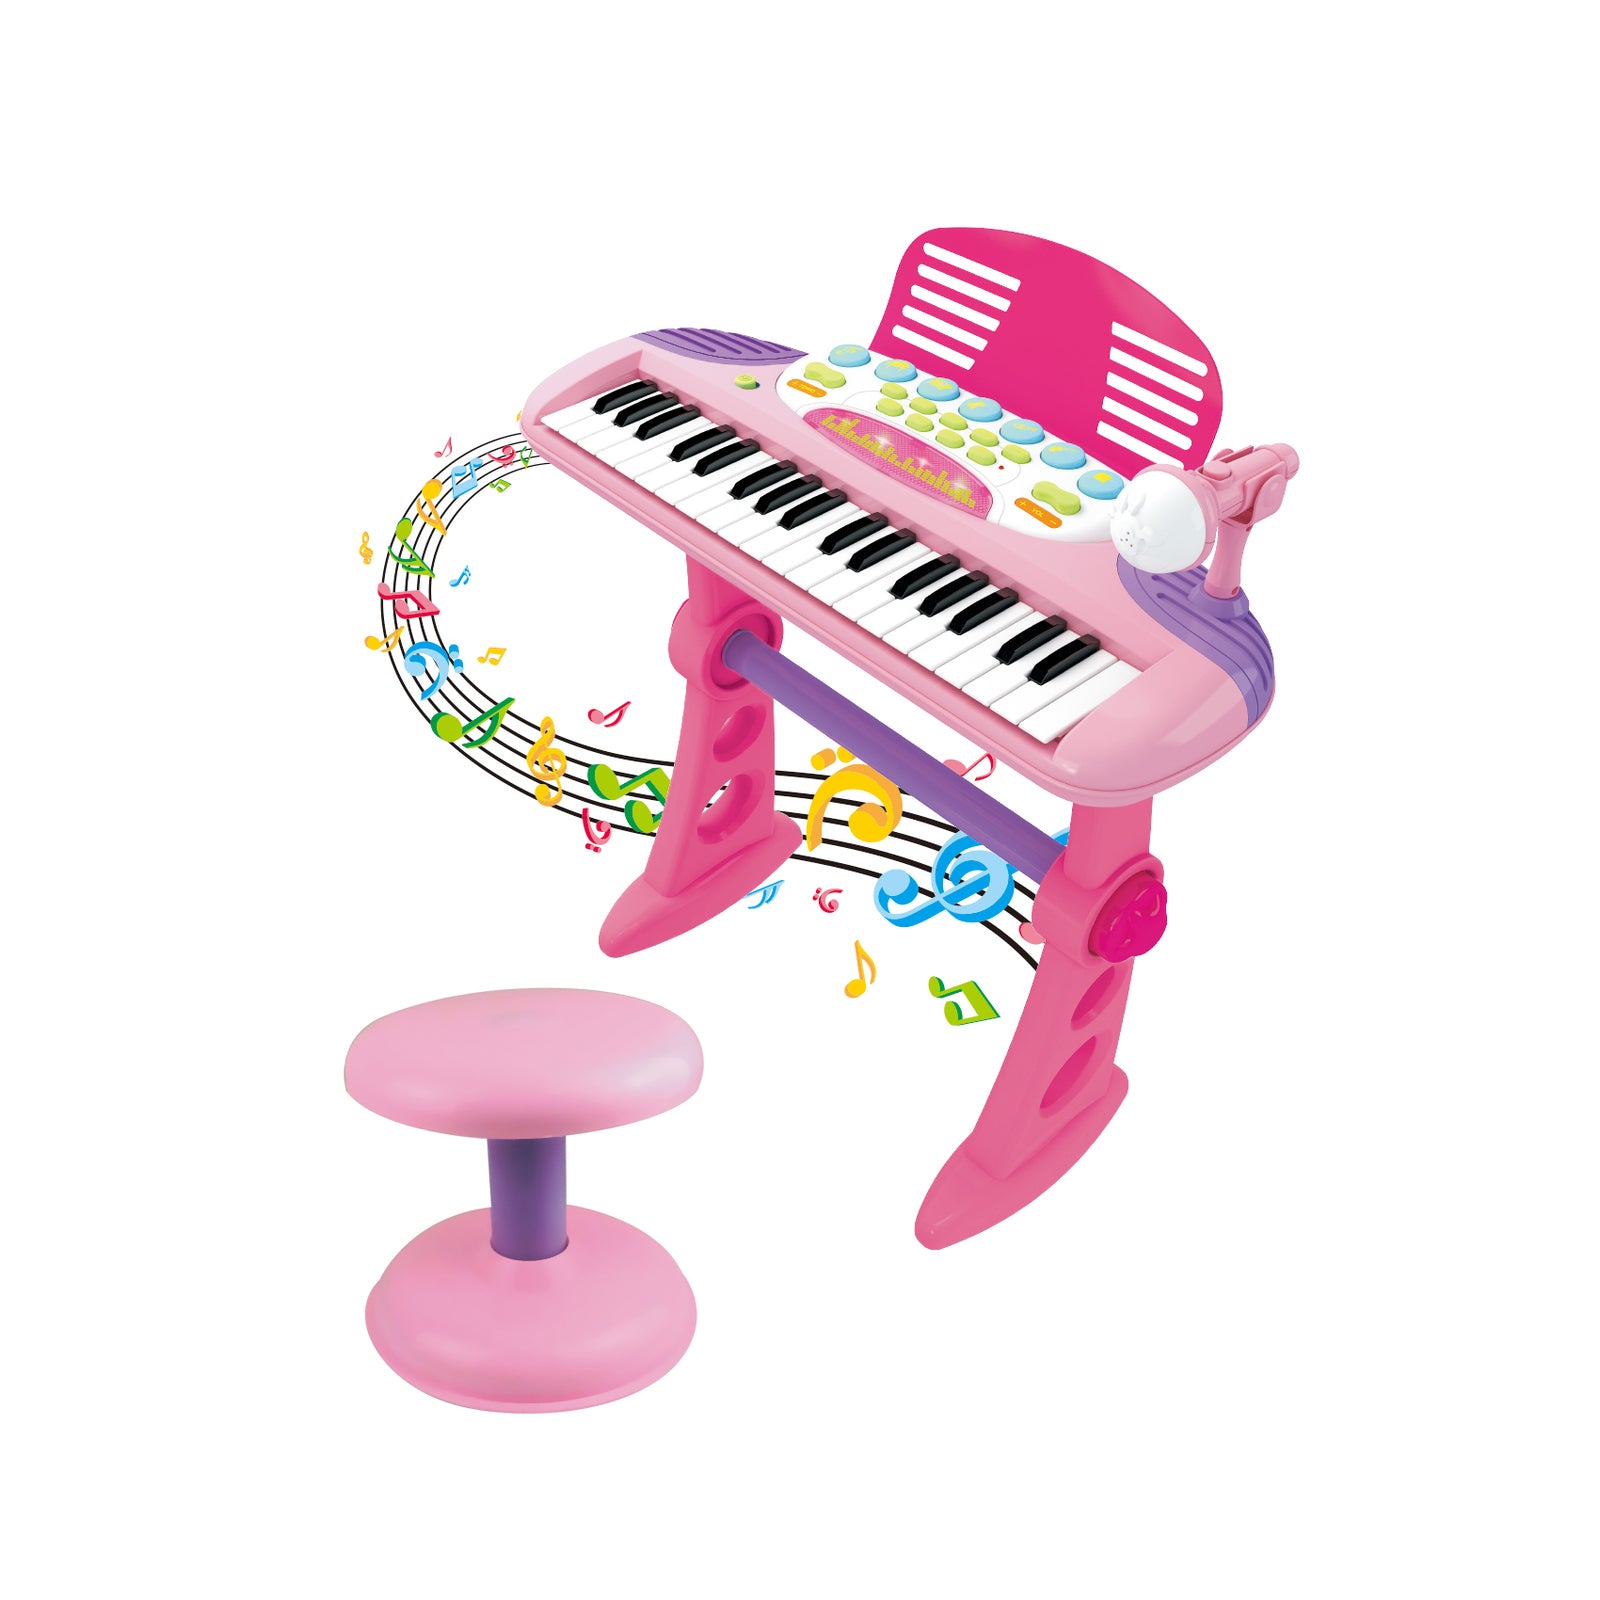 Children's Electronic Keyboard with Stand (Pink) Musical Instrument Toy - 0